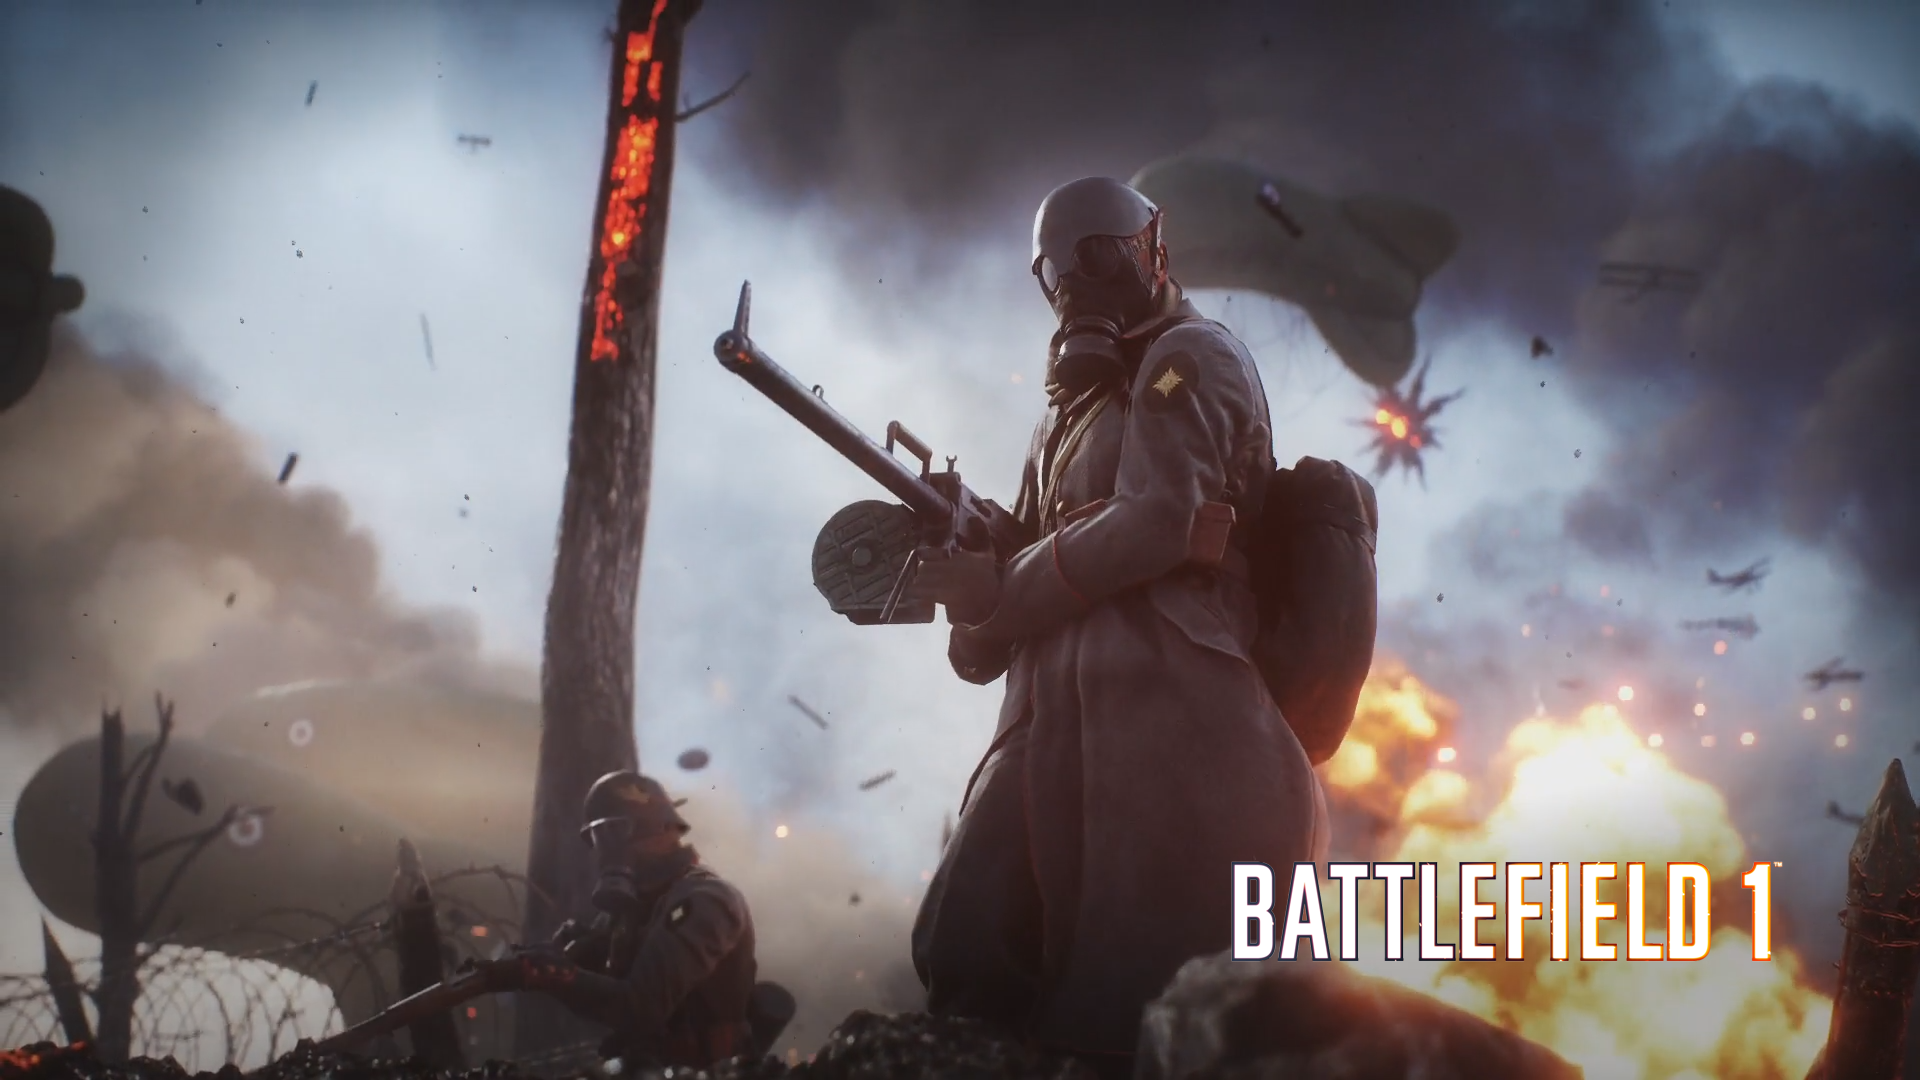 General 1920x1080 Battlefield 1 video games video game art PC gaming